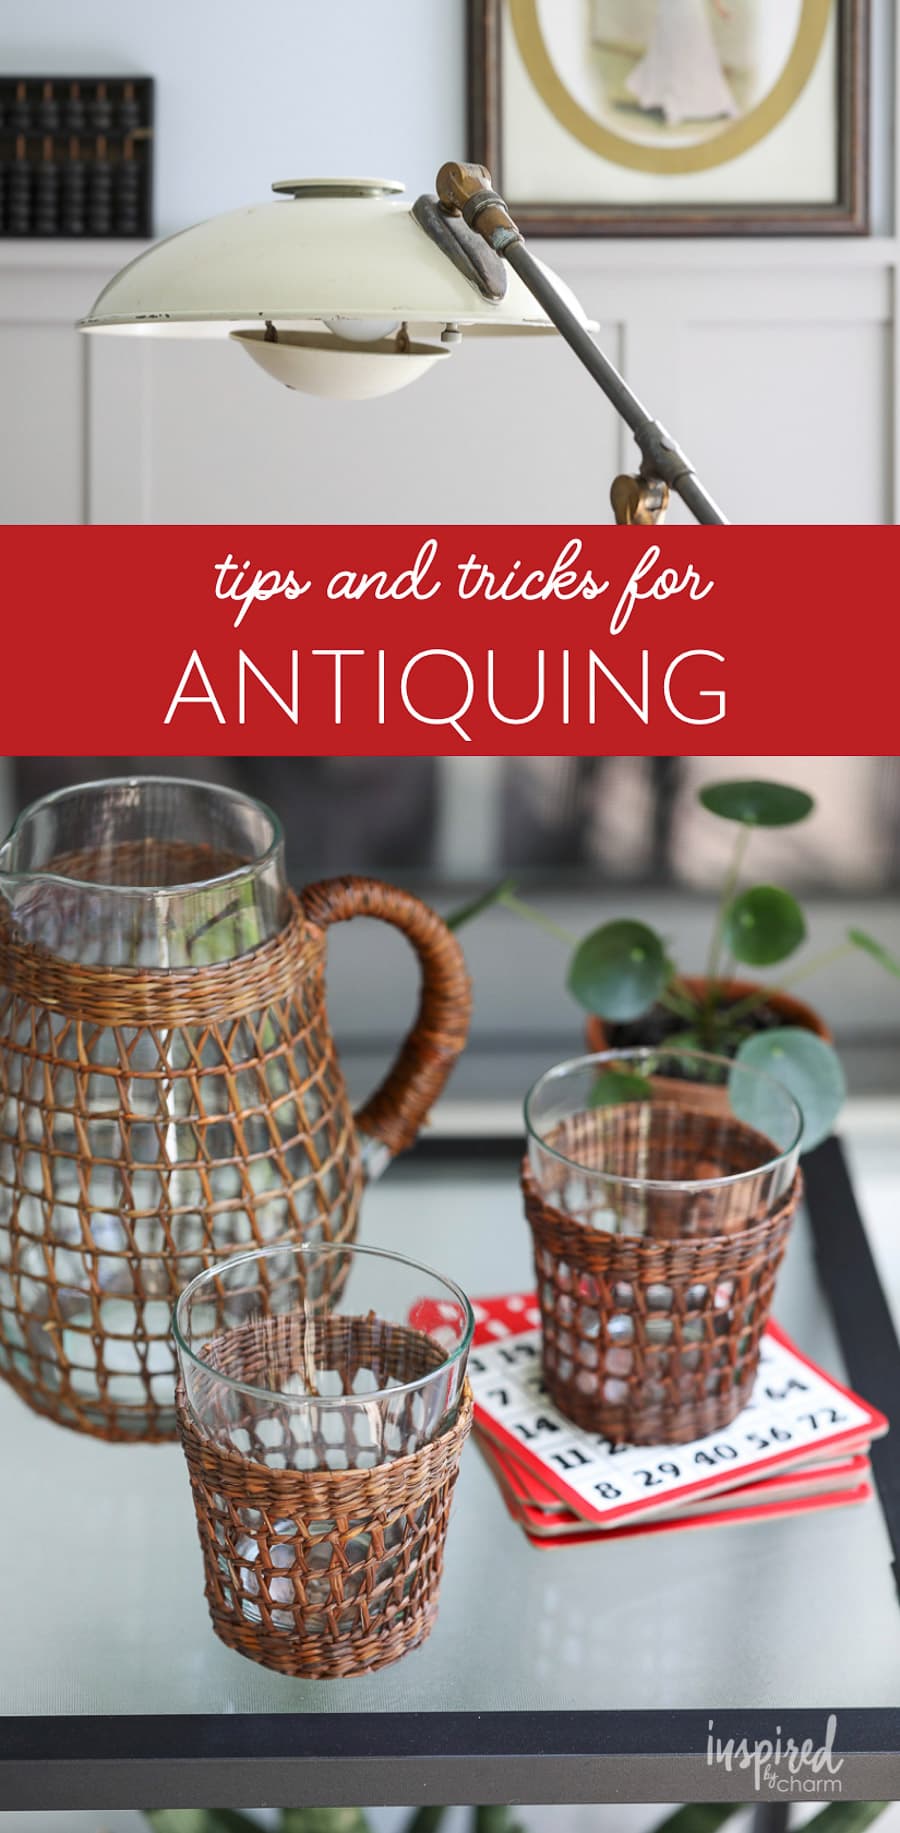 My best Tips and Tricks for Antiquing #antiquing #home #decor #antiques #vintage #decorating